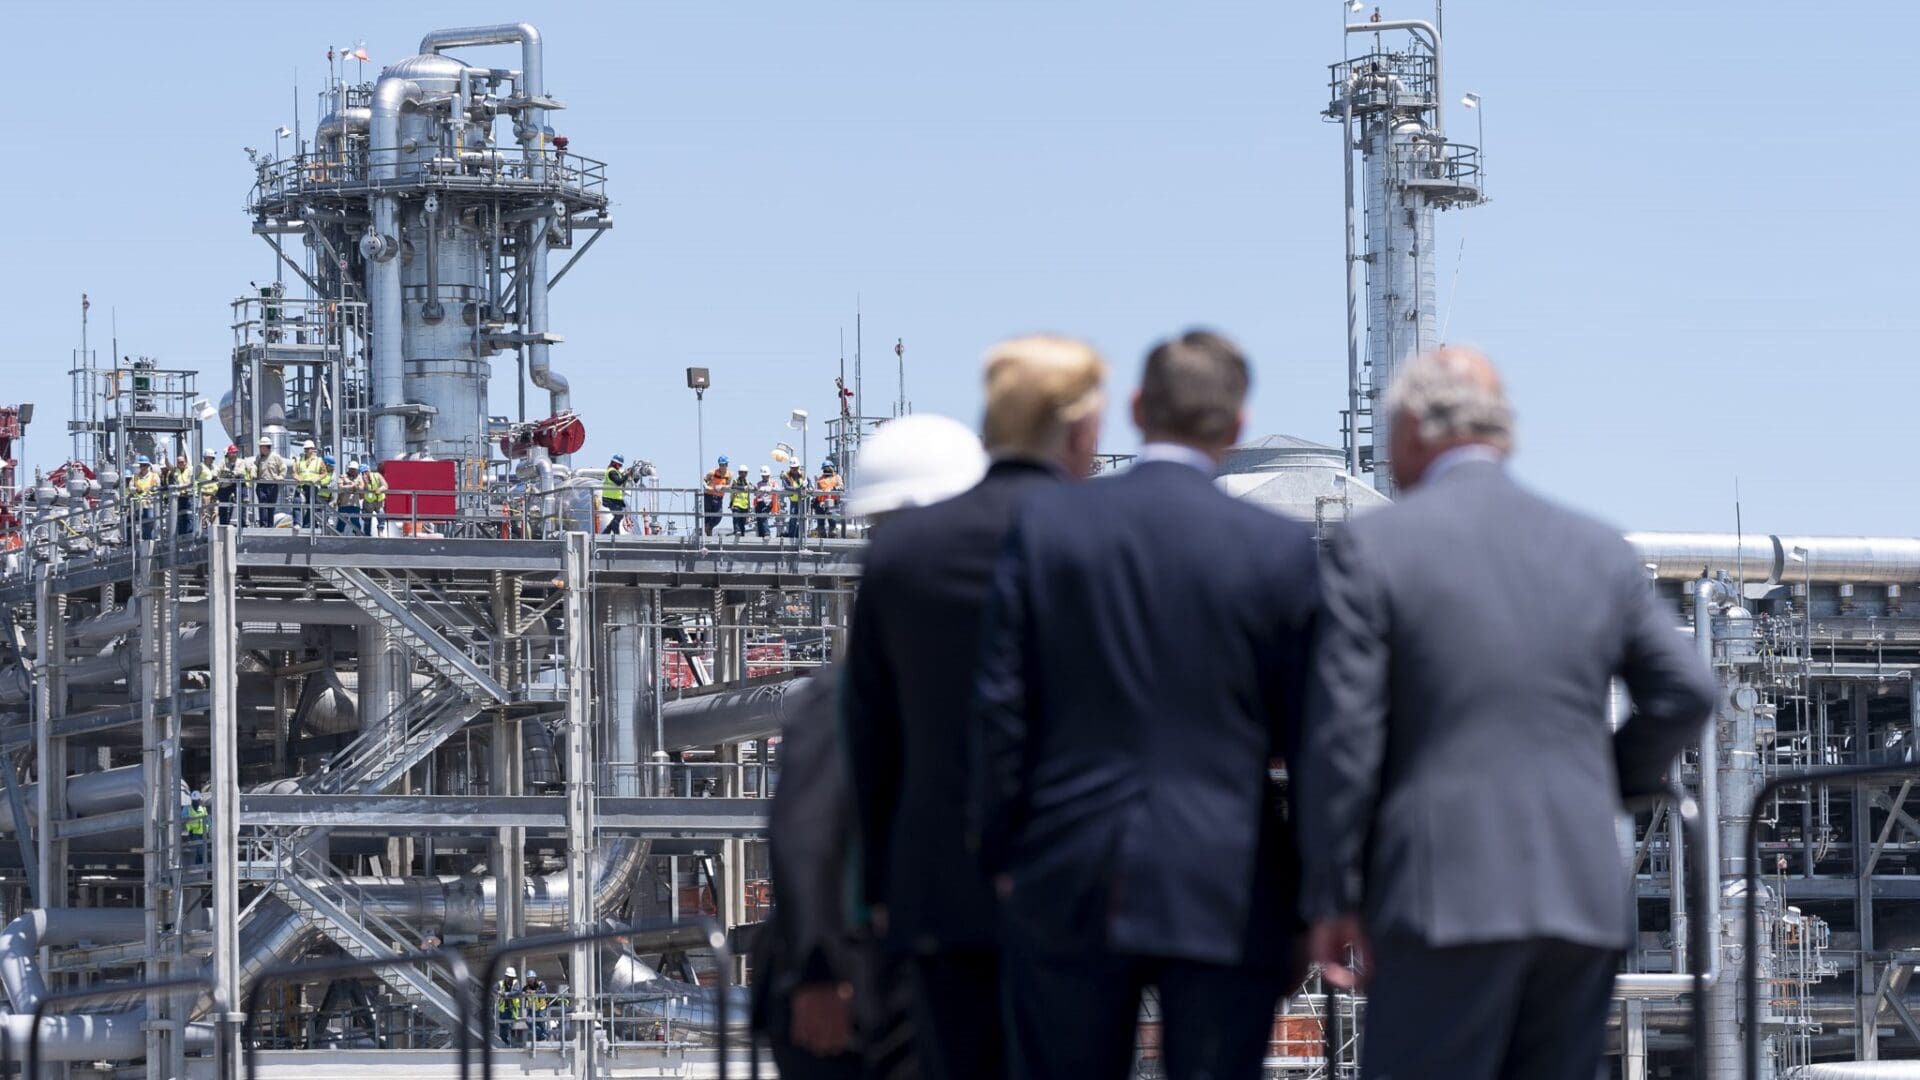 President Donald J. Trump participates in a walking tour of Cameron LNG Export Terminal on 14 May 2019 in Hackberry, La.